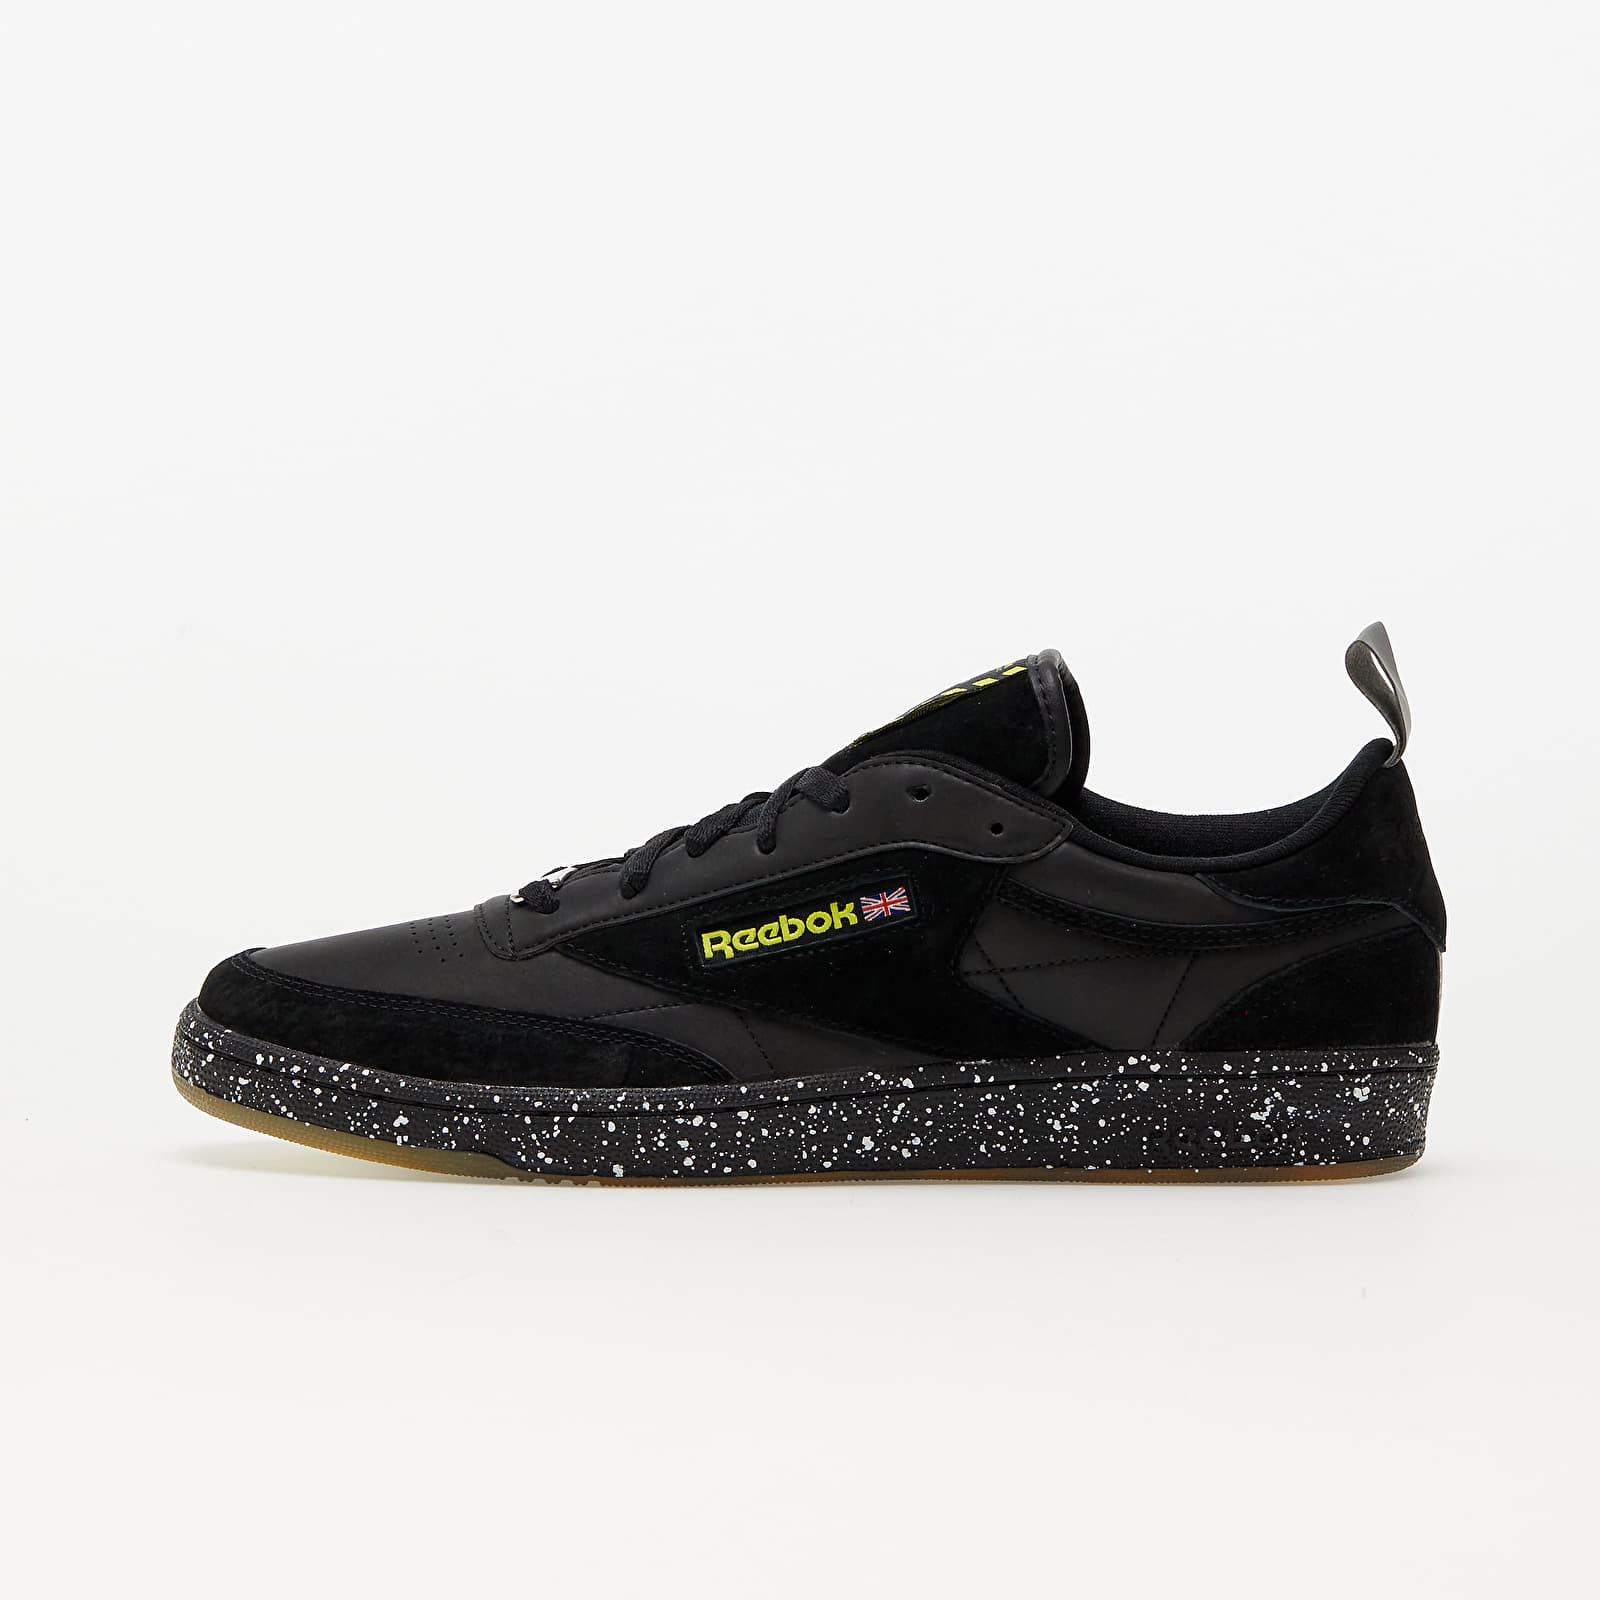 Chaussures et baskets homme Reebok Club C 85 Faces&Laces Black/ Hero Yellow/ Silver 